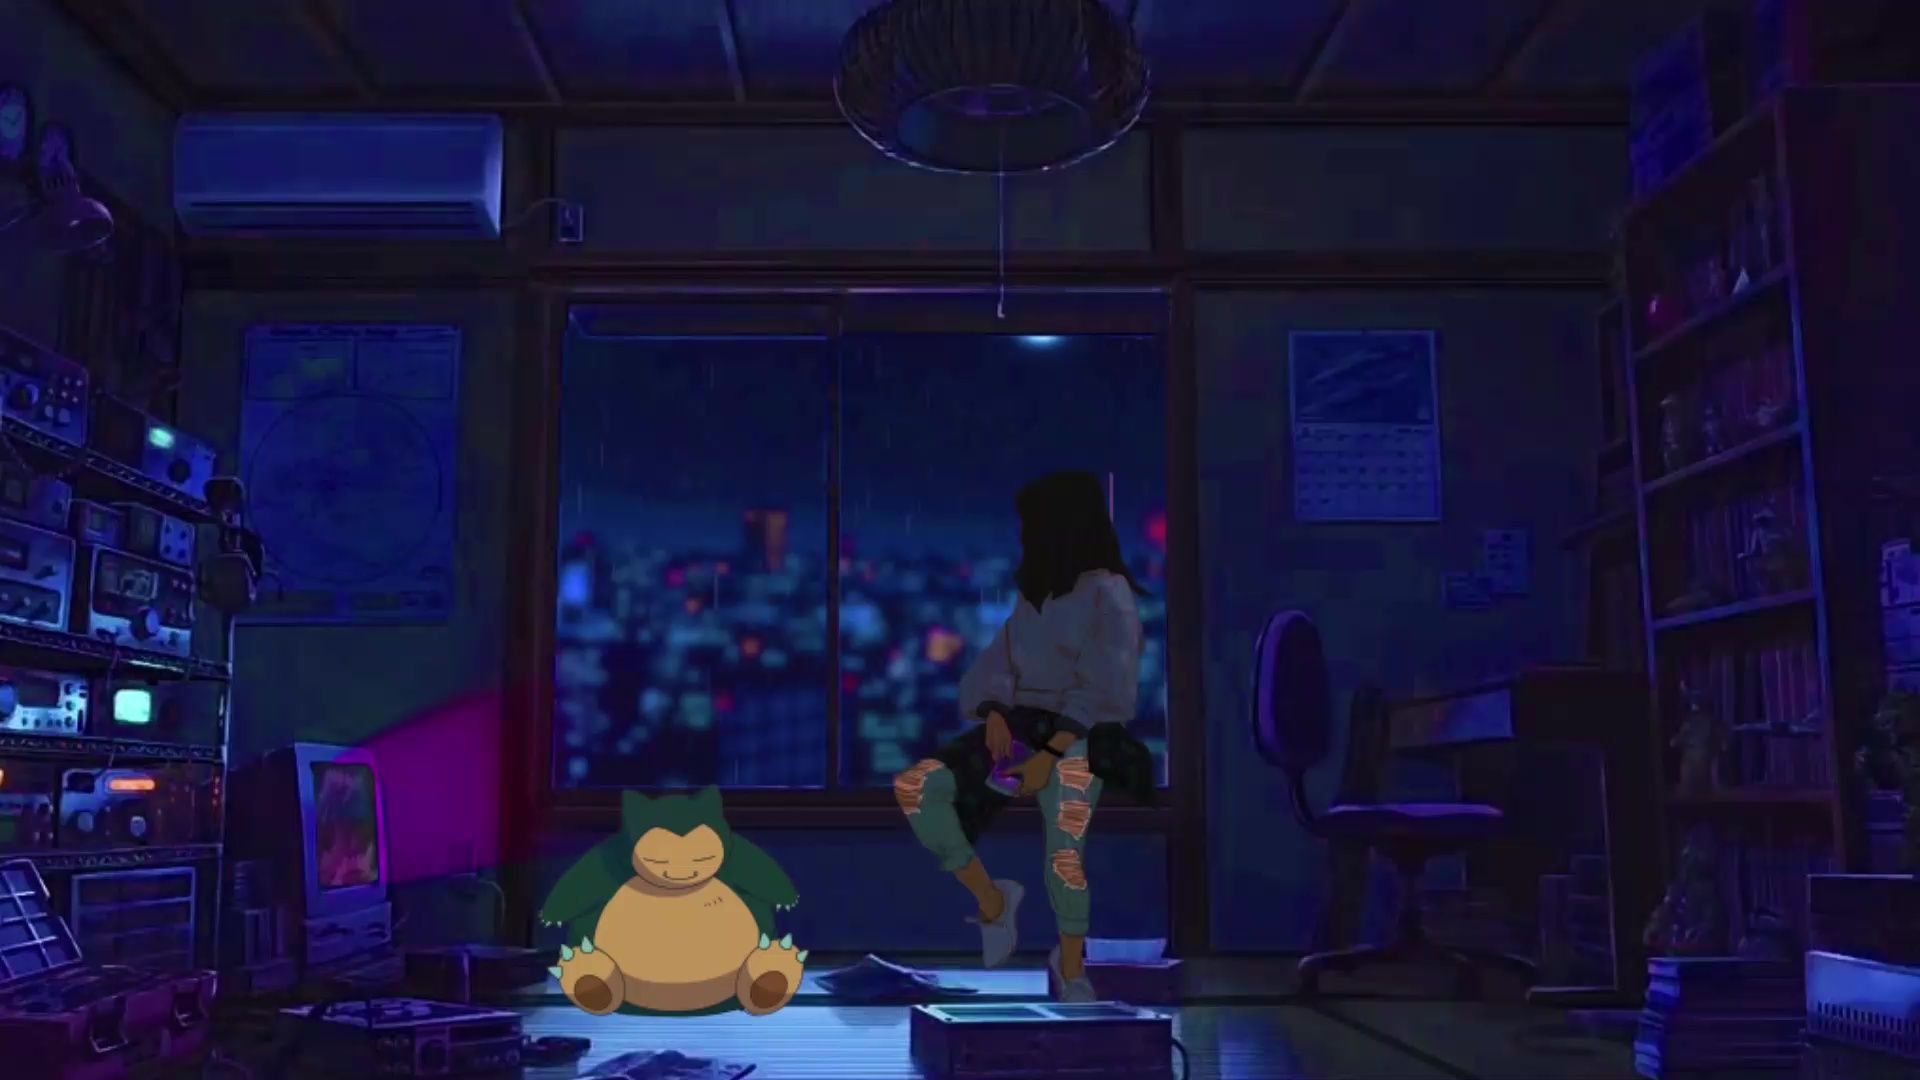 A girl sits on her bed in her room, reading a book. Snorlax is sitting on the floor next to her. - 1920x1080, computer, Windows 10